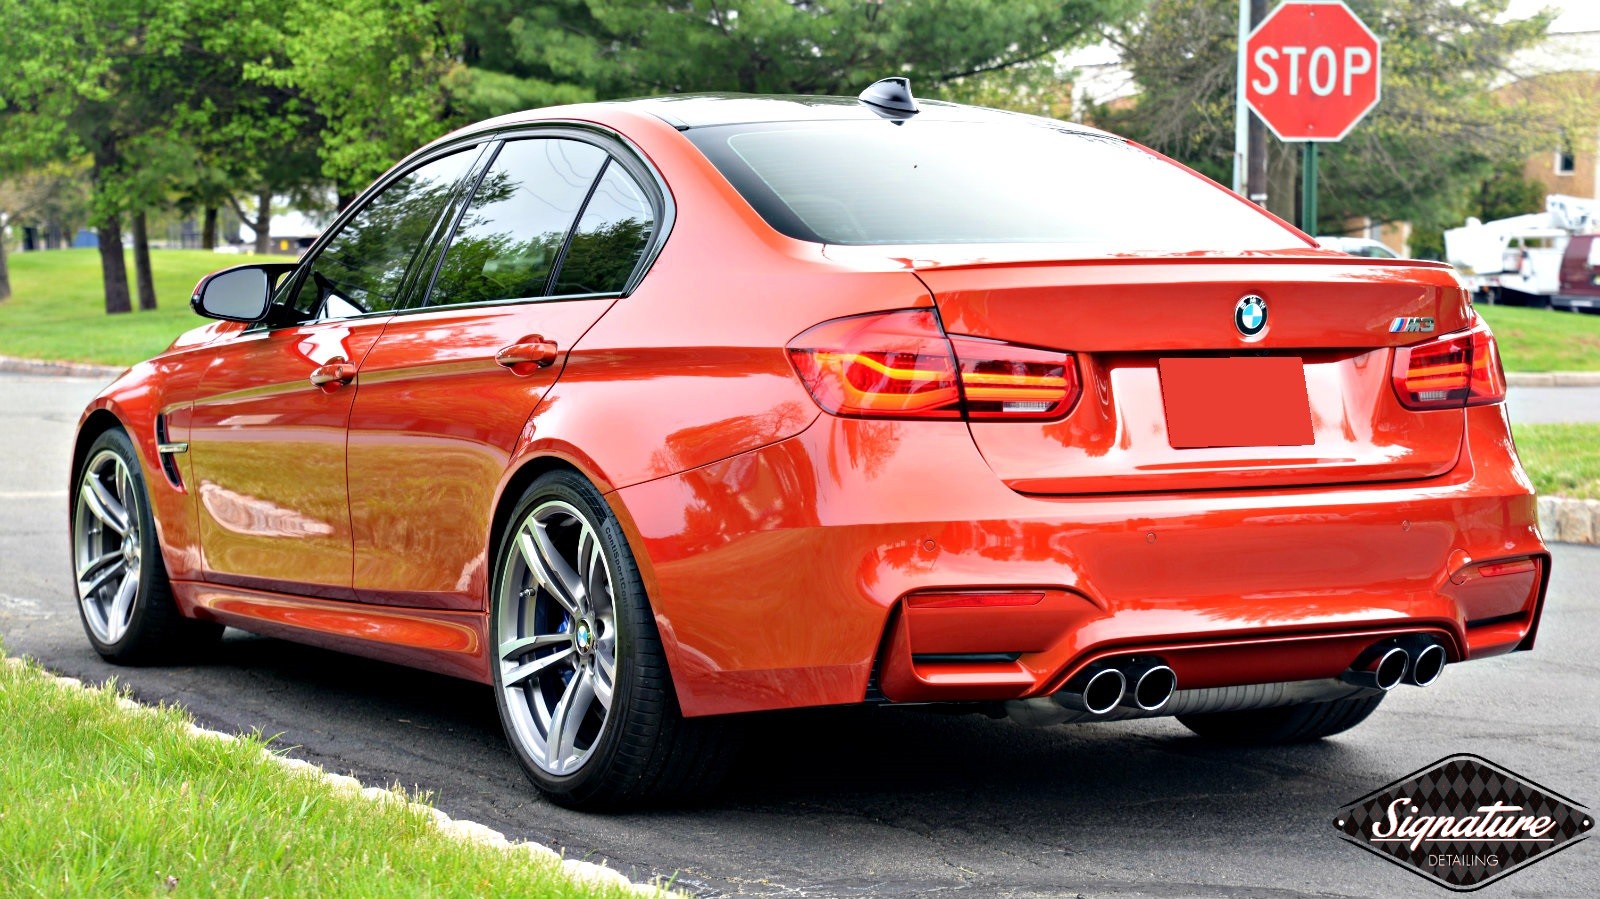 This BMW M3 was protected with Paint Protection Film and topped with a glass paint coating by Greg Gellas.